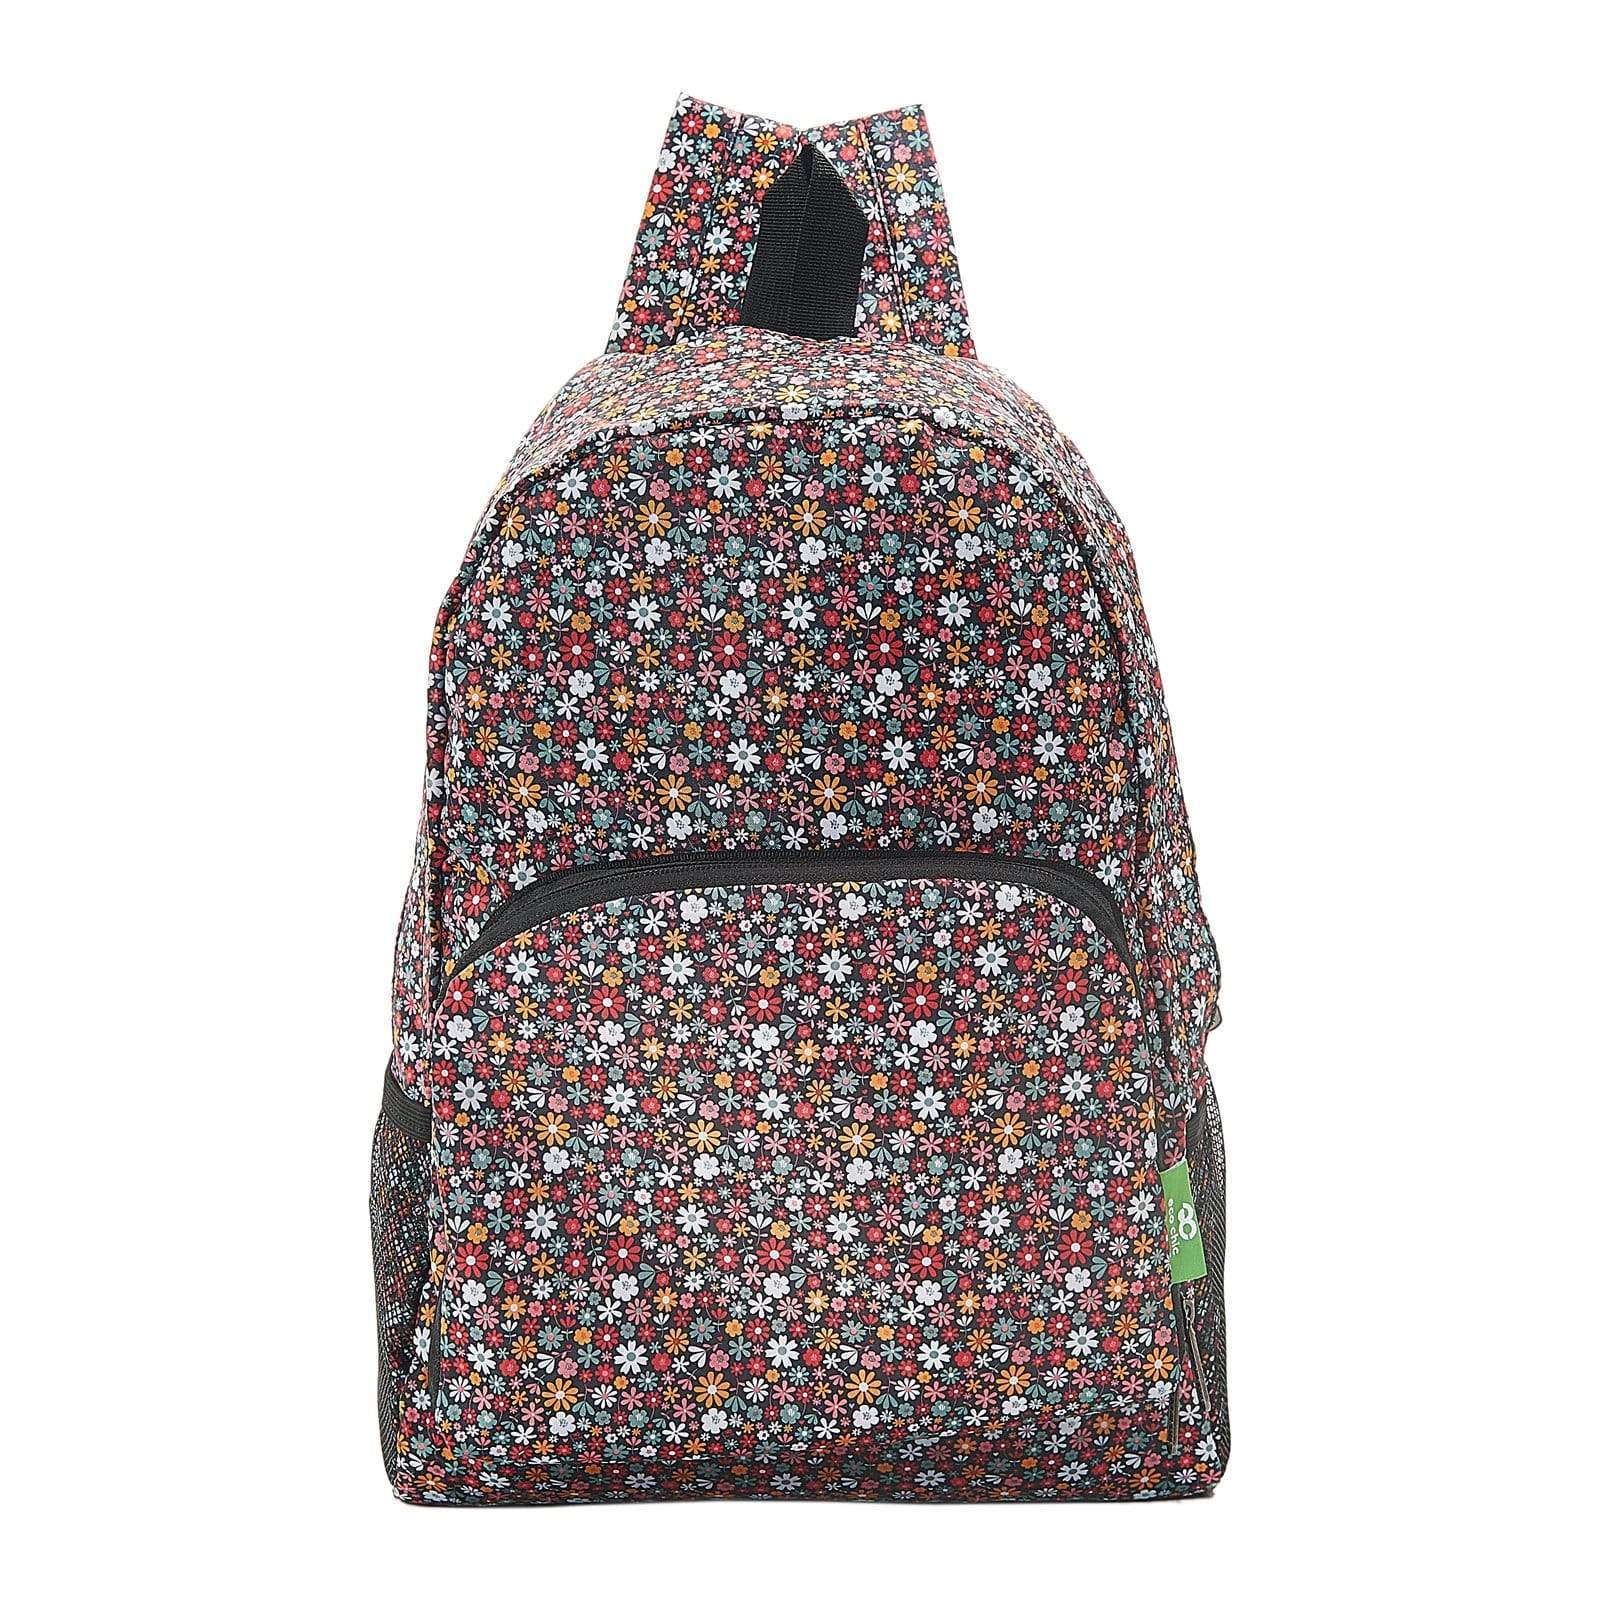 Eco Chic Eco Chic Lightweight Foldable Backpack Ditsy